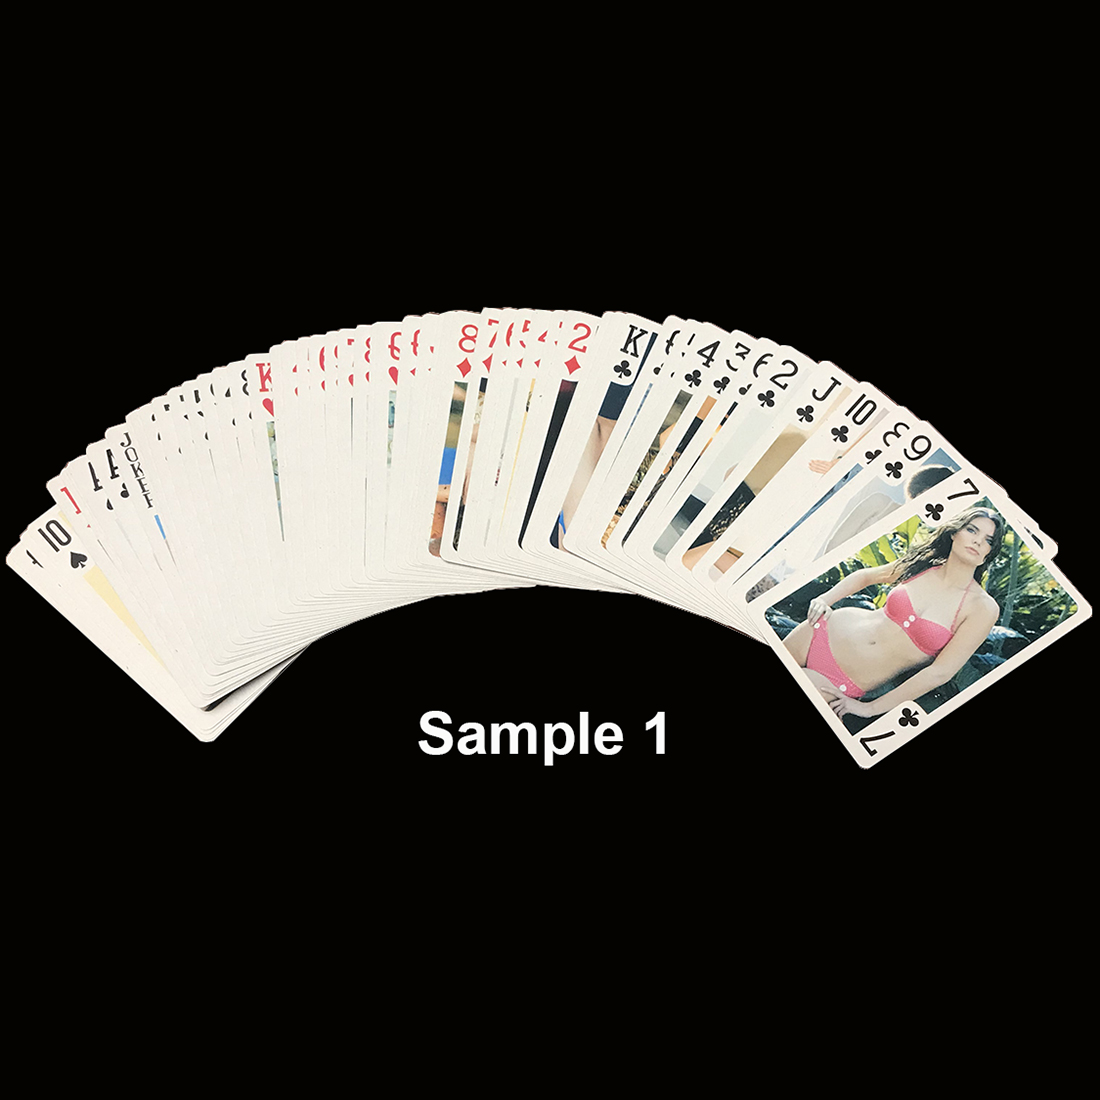 NEWEST WHOLE SETS CUSTOM MAGICAL PROXY Playing CARDS Black Core HOLO/FOIL BOARD Games Cards BL Newest Cards Proxy King Factory